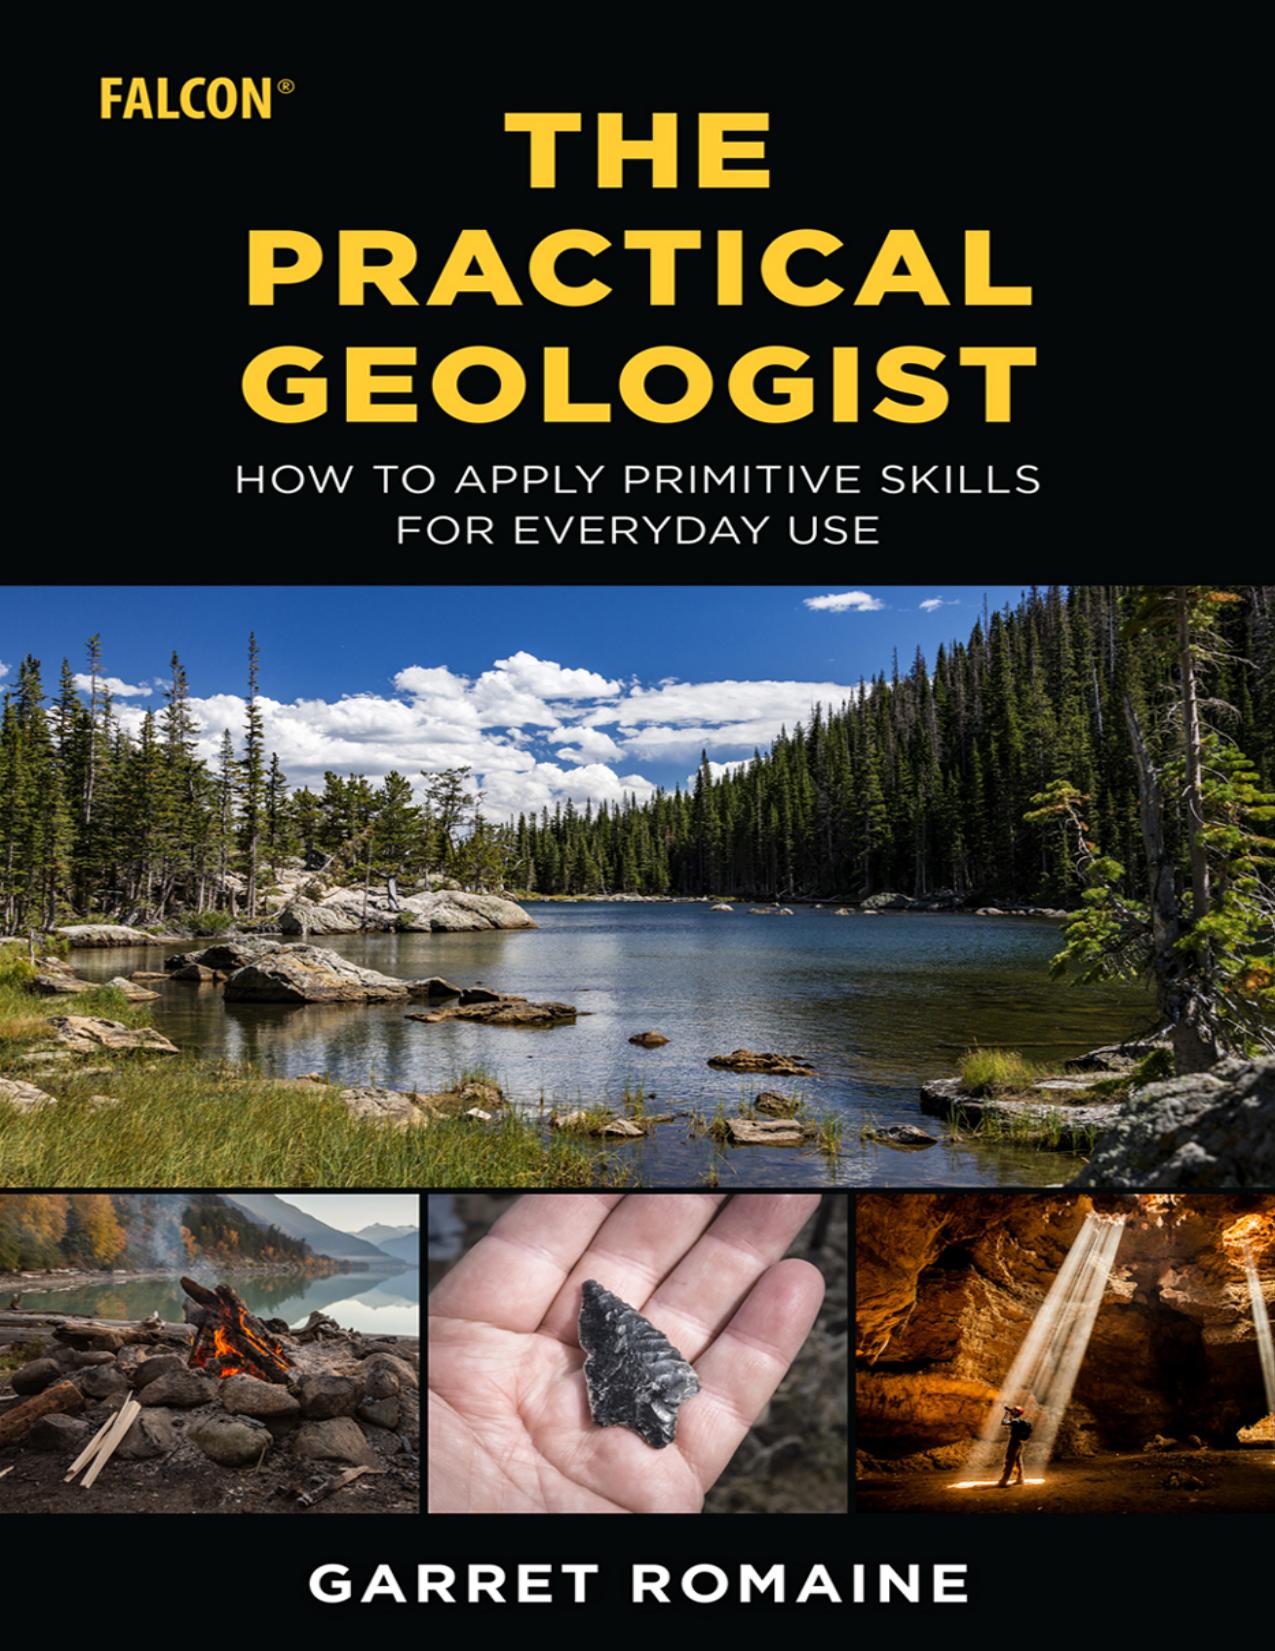 The Practical Geologist: How to Apply Primitive Skills for Everyday Use by Garret Romaine